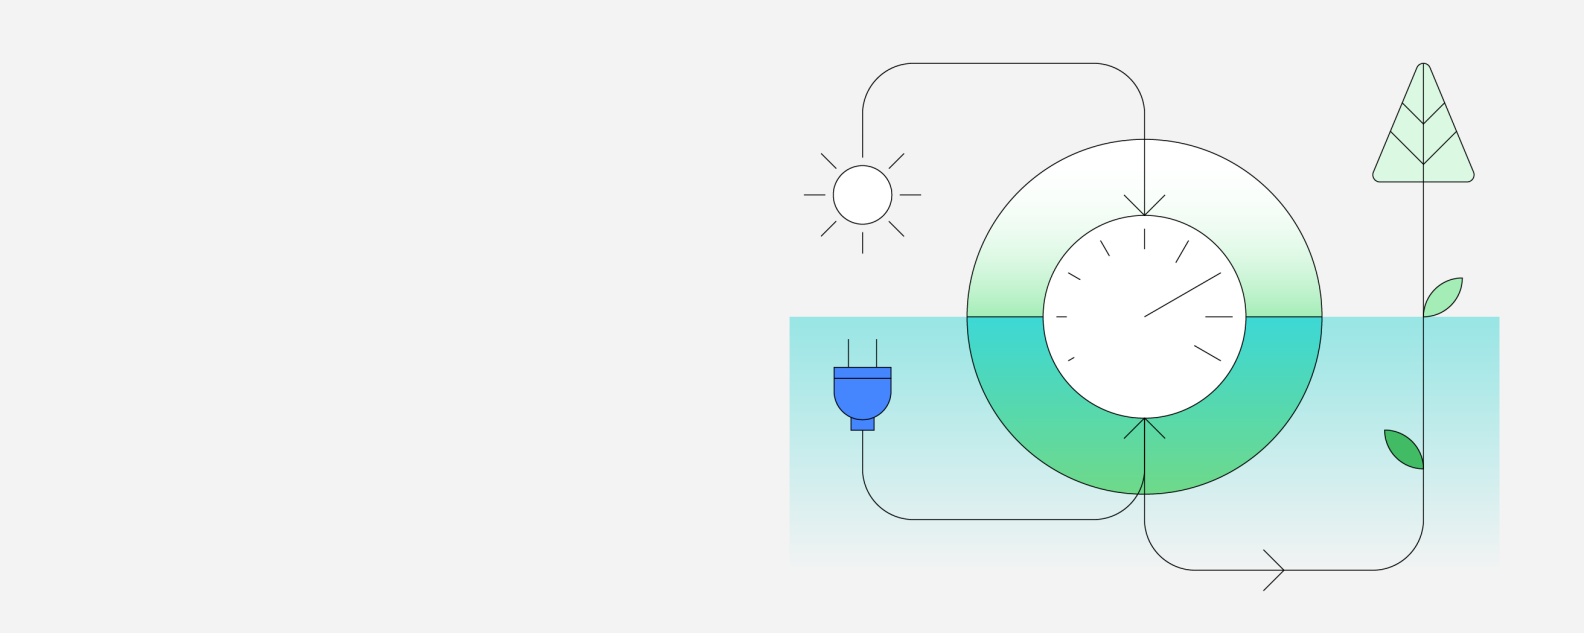 All illustration of a meter surrounded by icons for a sun, a plug and a leaf.